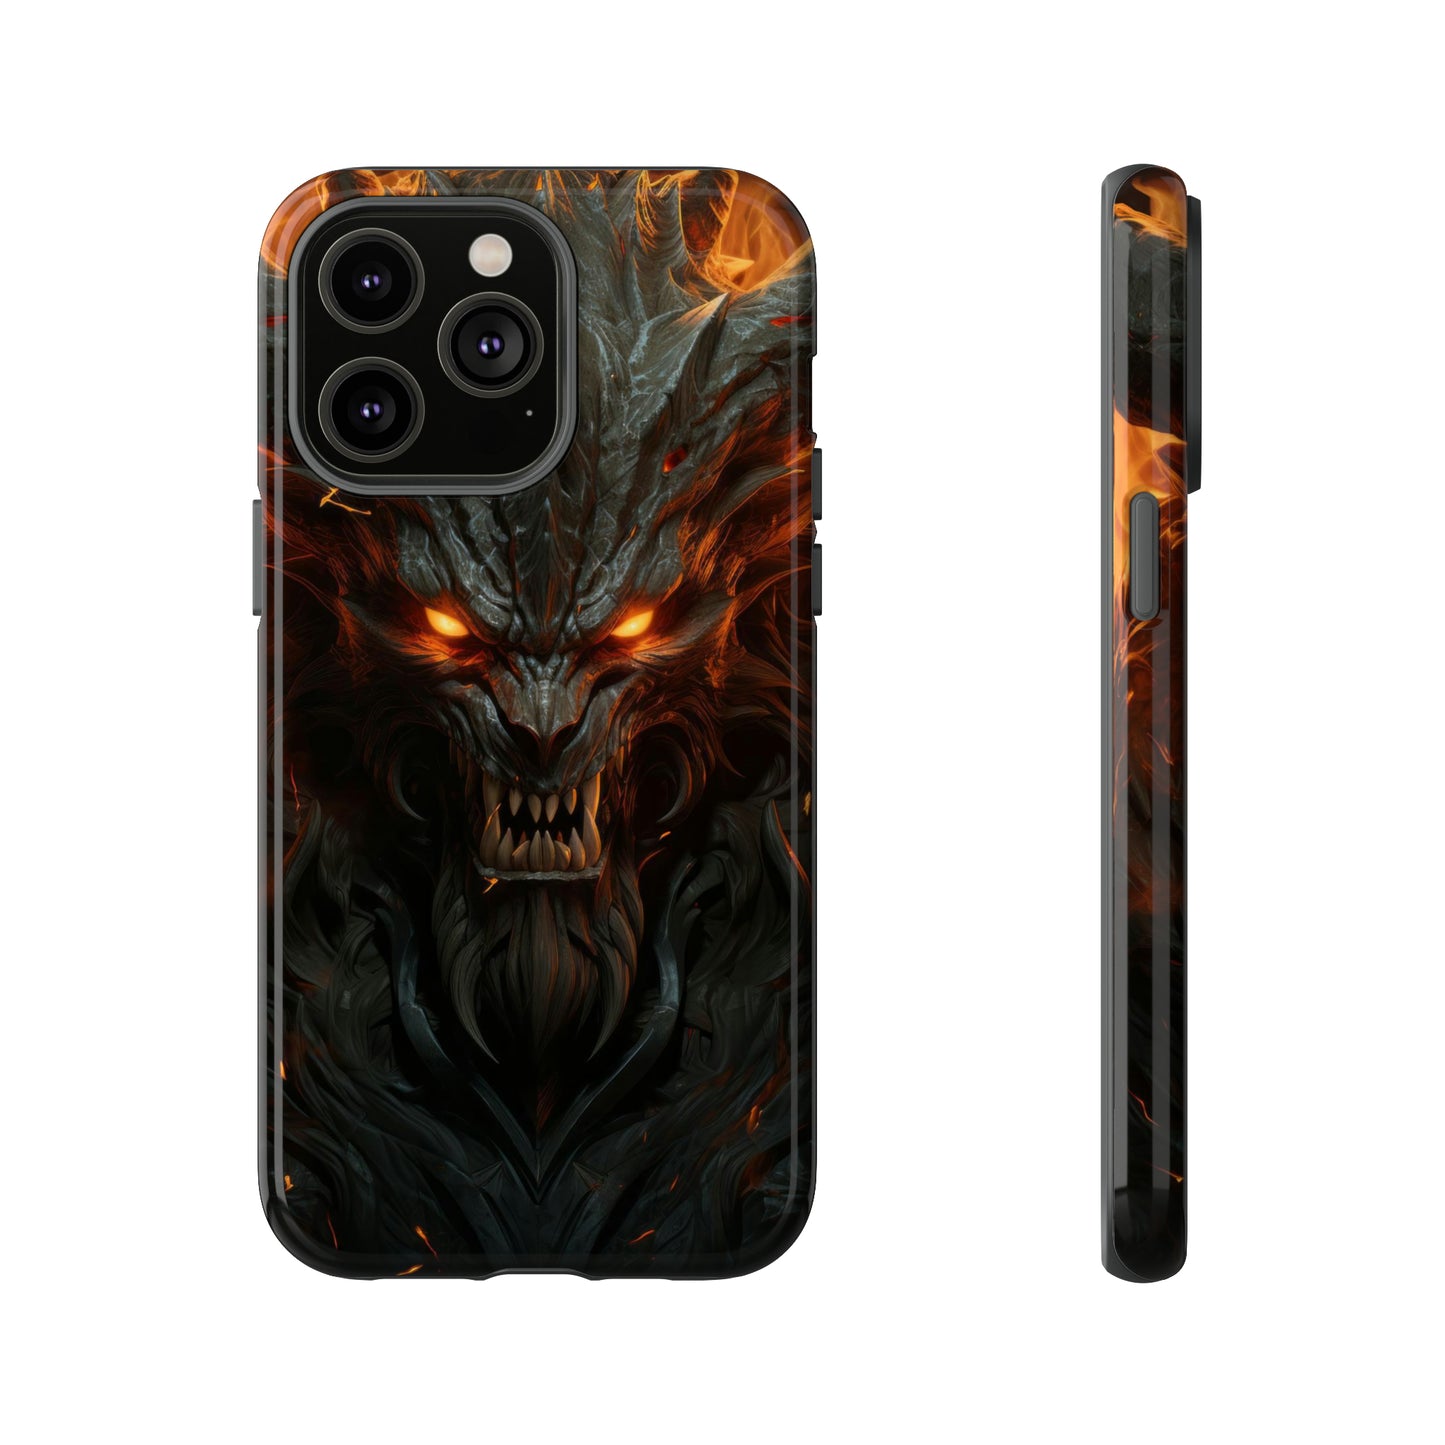 Flaming Stone Lion Warrior Protective Phone Case - Fiery Roar Design for iPhone, Samsung, Pixel